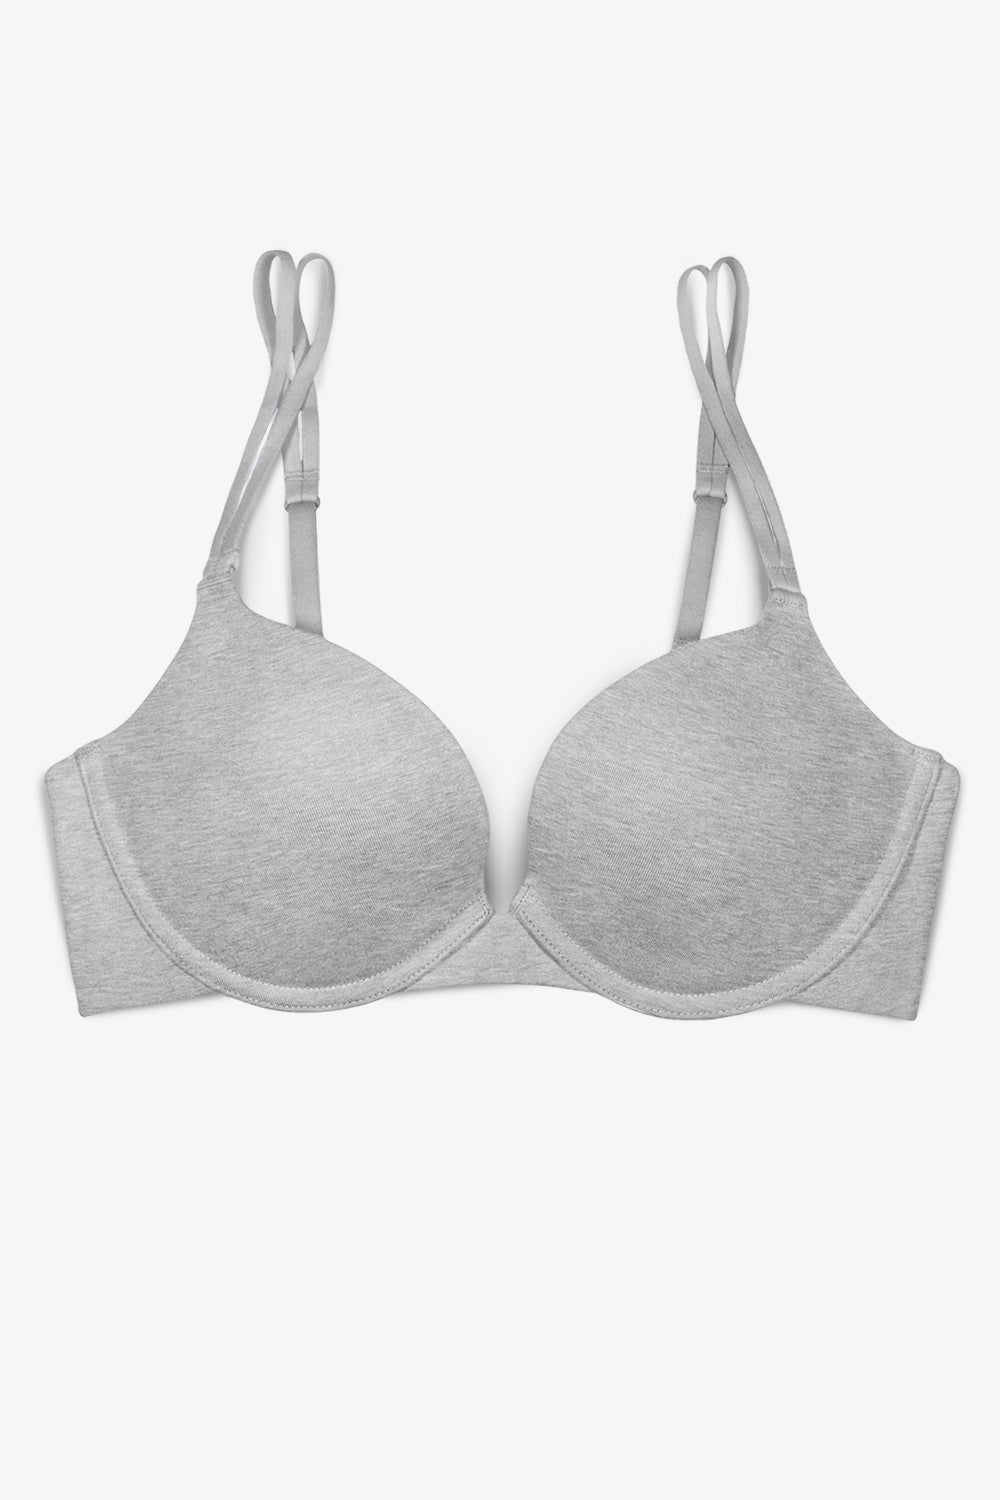 LIGHT PADDED PUSH UP BRA🔥💋 AVAILABLE SIZE - 36D PRICE- 13,500 CLICK THE  LINK IN BIO TO CHAT WITH US ON WHATSAPP #mychoicelinge